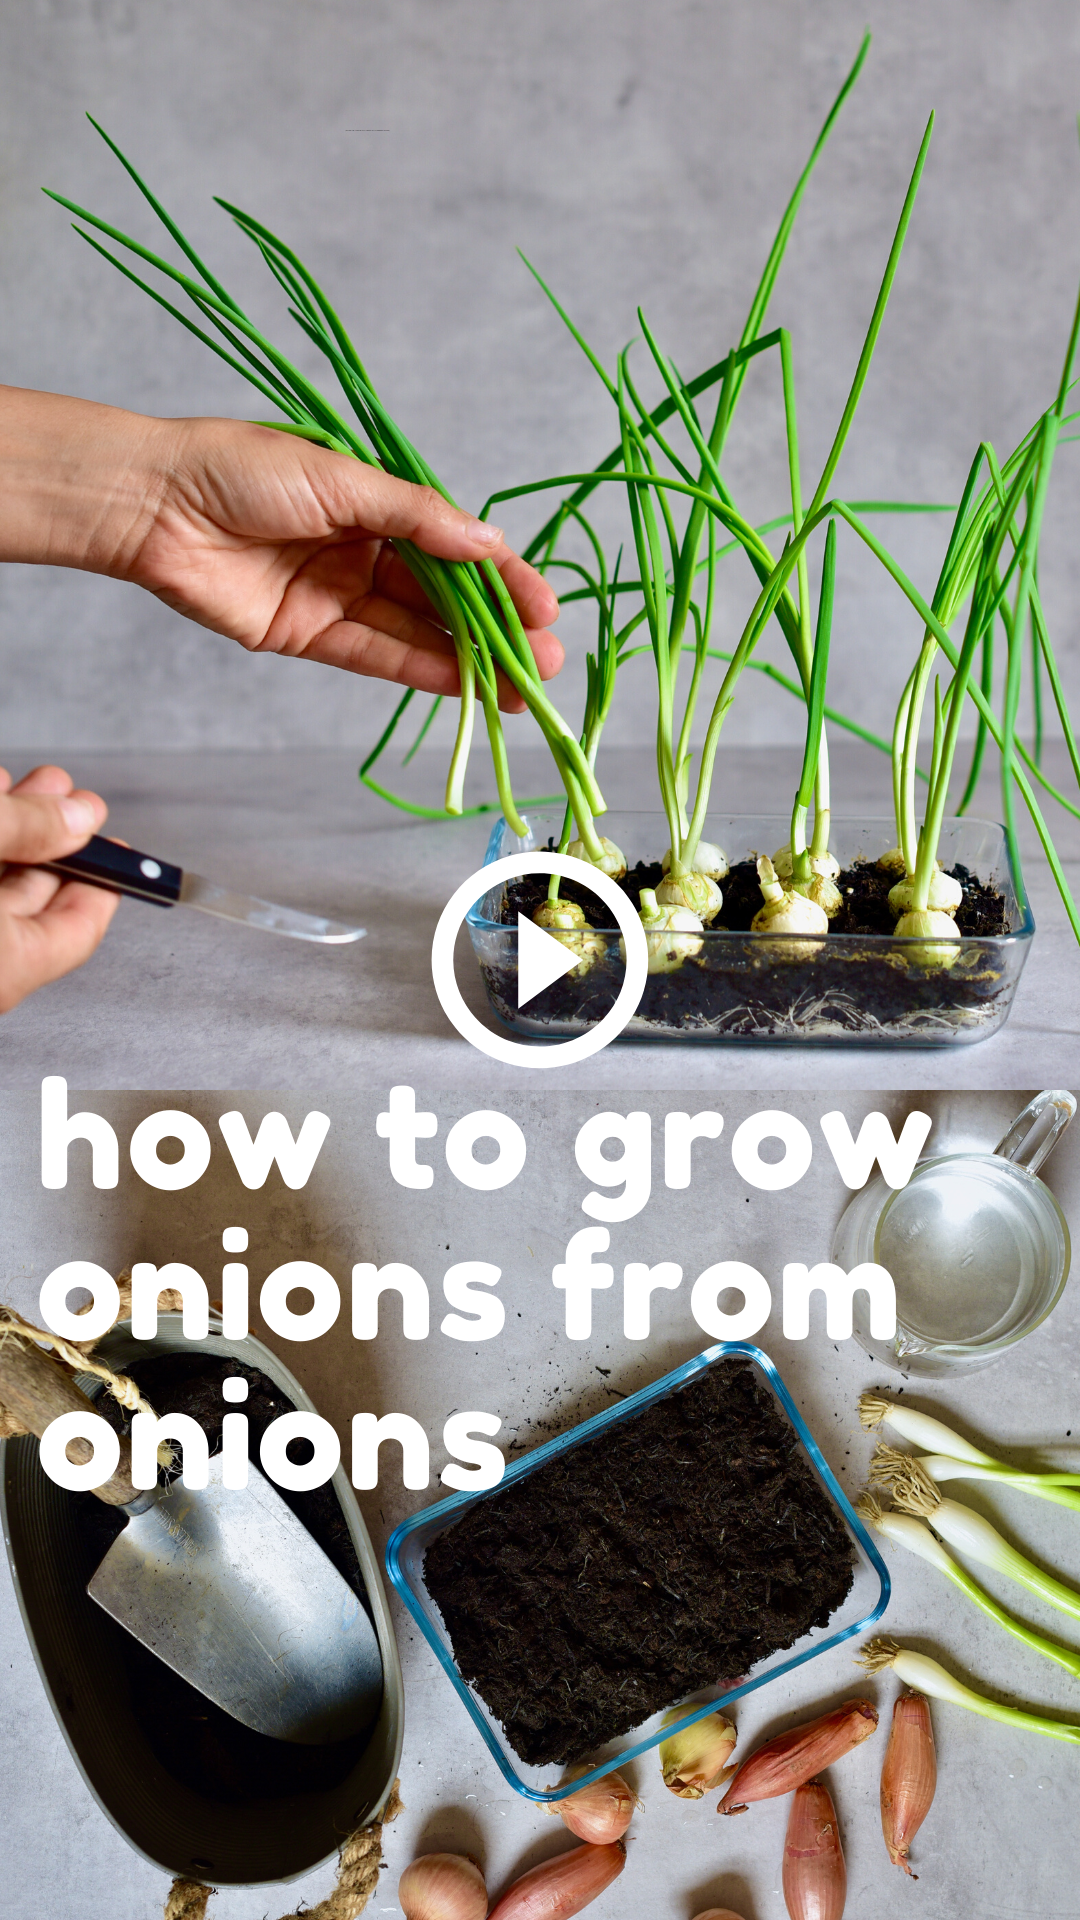 How to Grow Onions at Home From Food Scraps -   19 planting DIY spring ideas